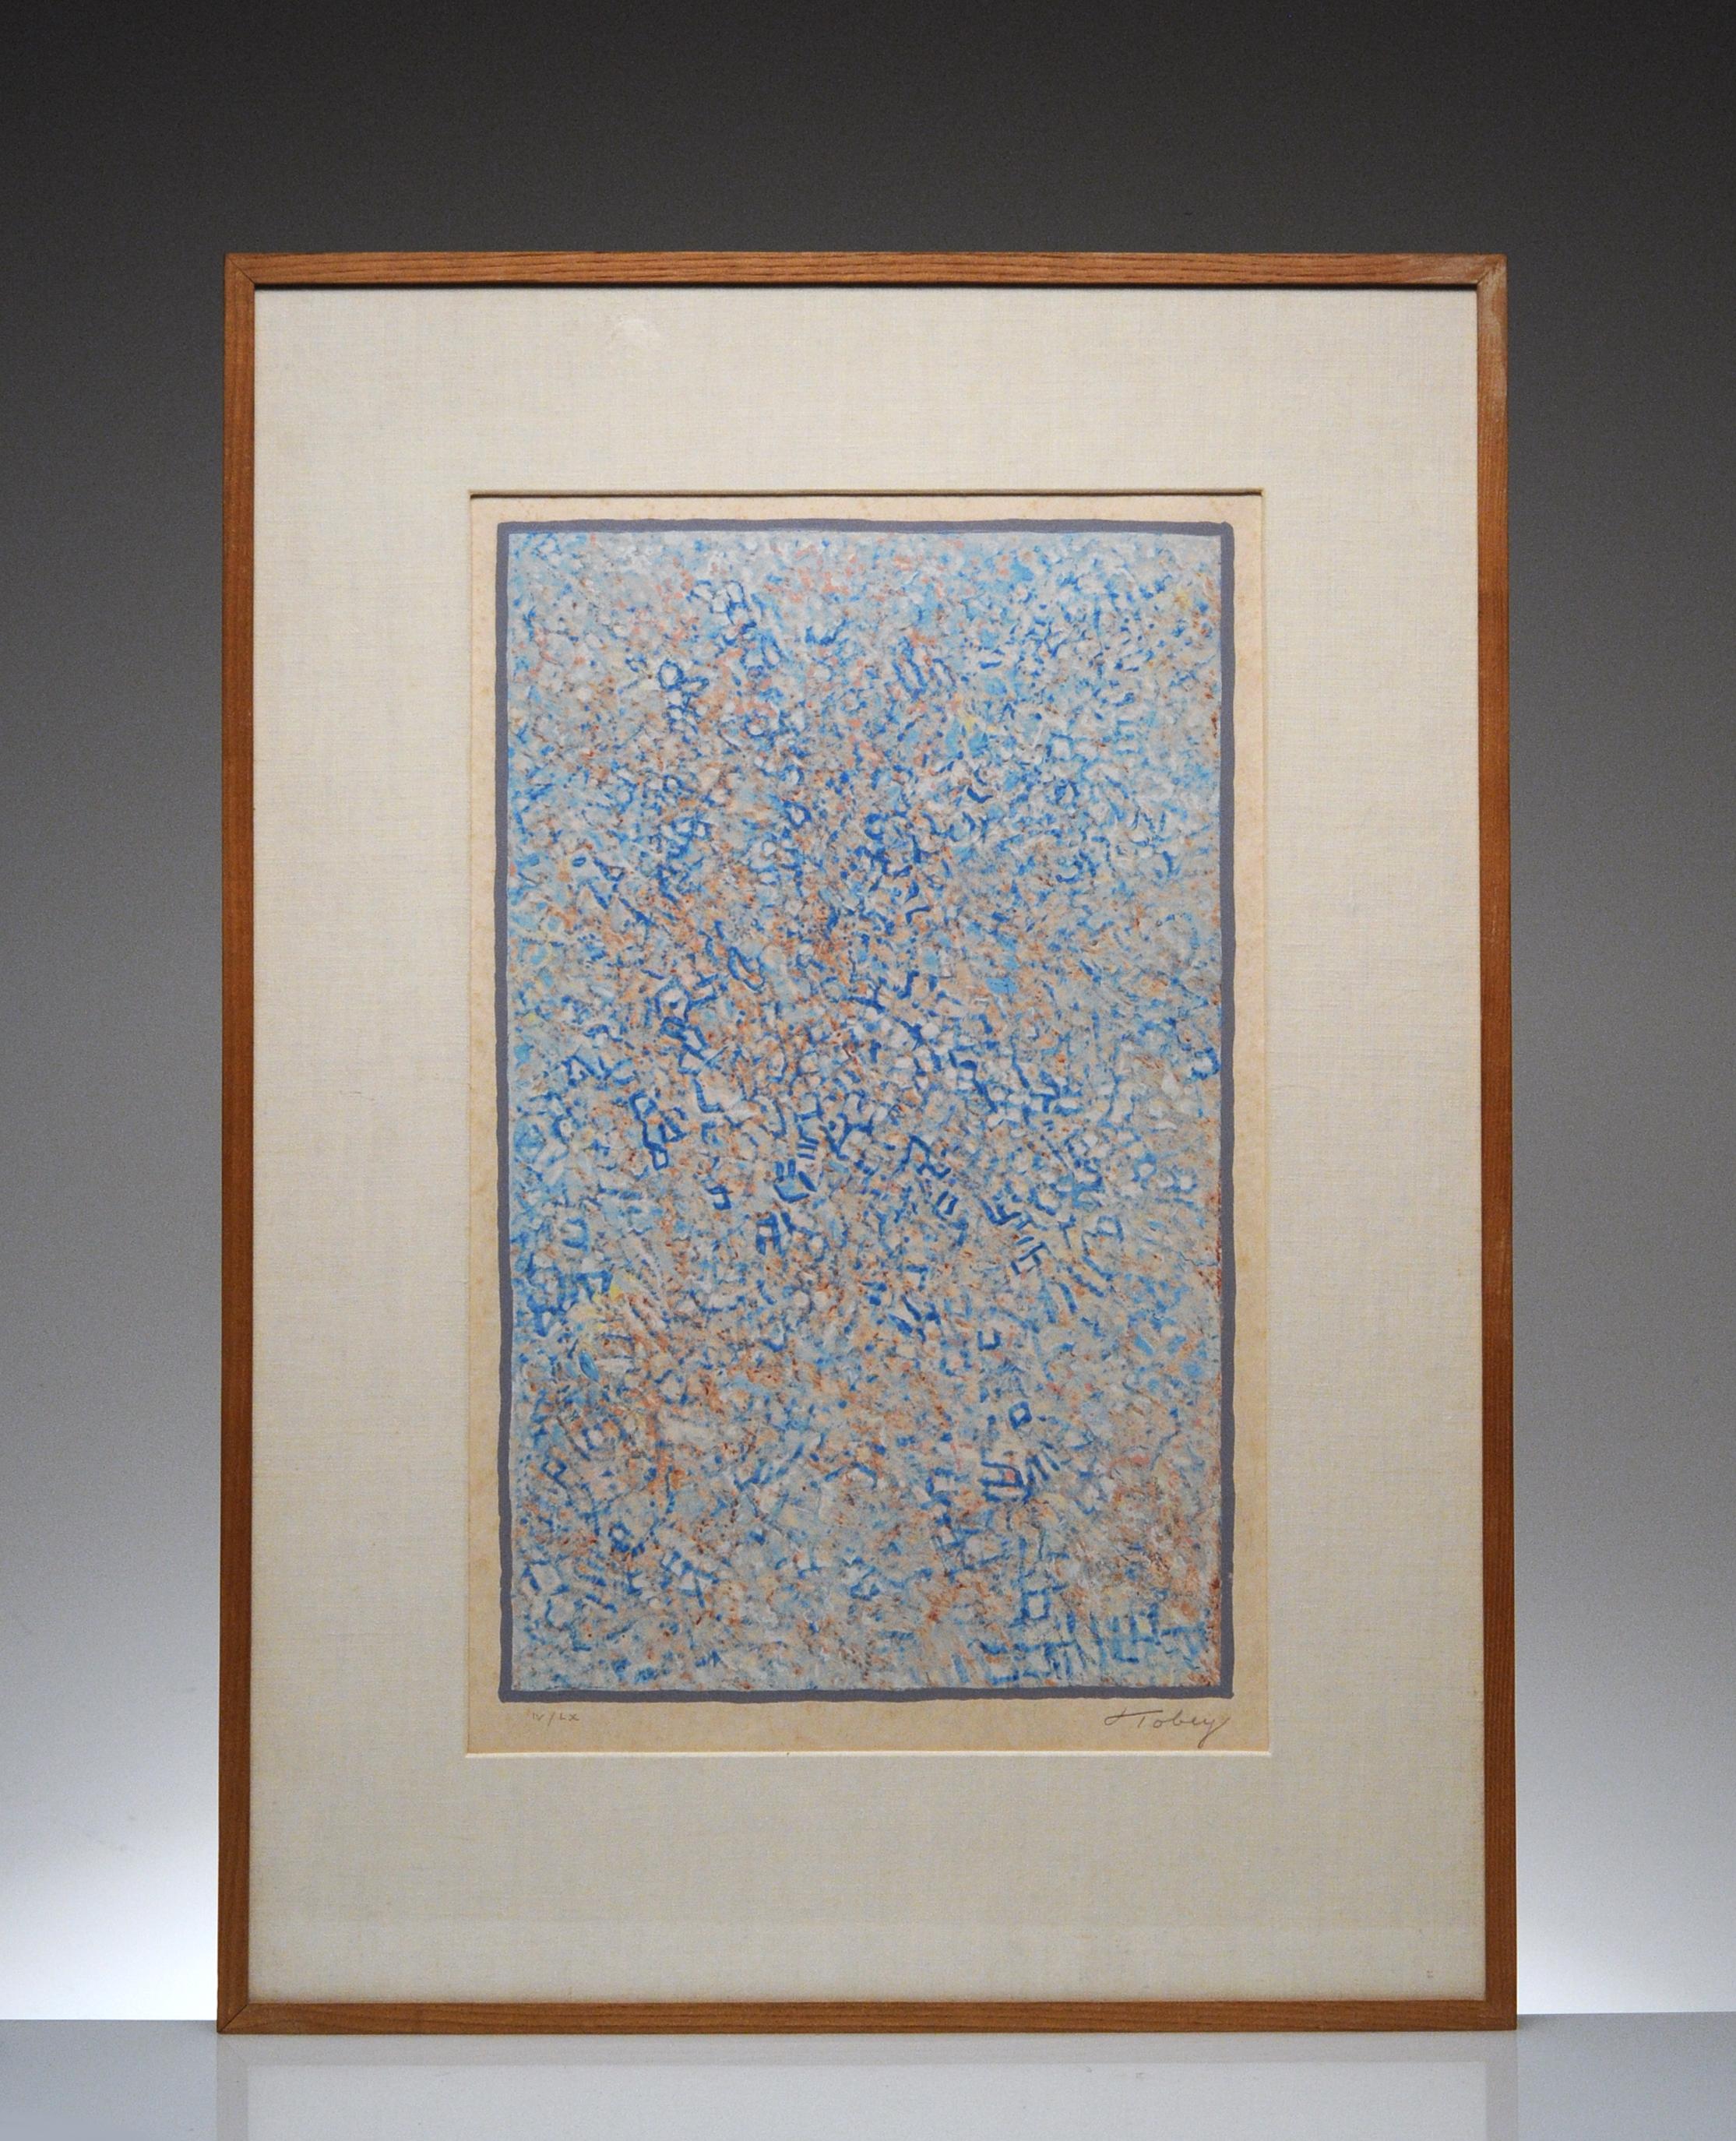 Signed lithograph by Mark Tobey (American, 1890-1976). Printed on Japanese paper in 1974 and titled 